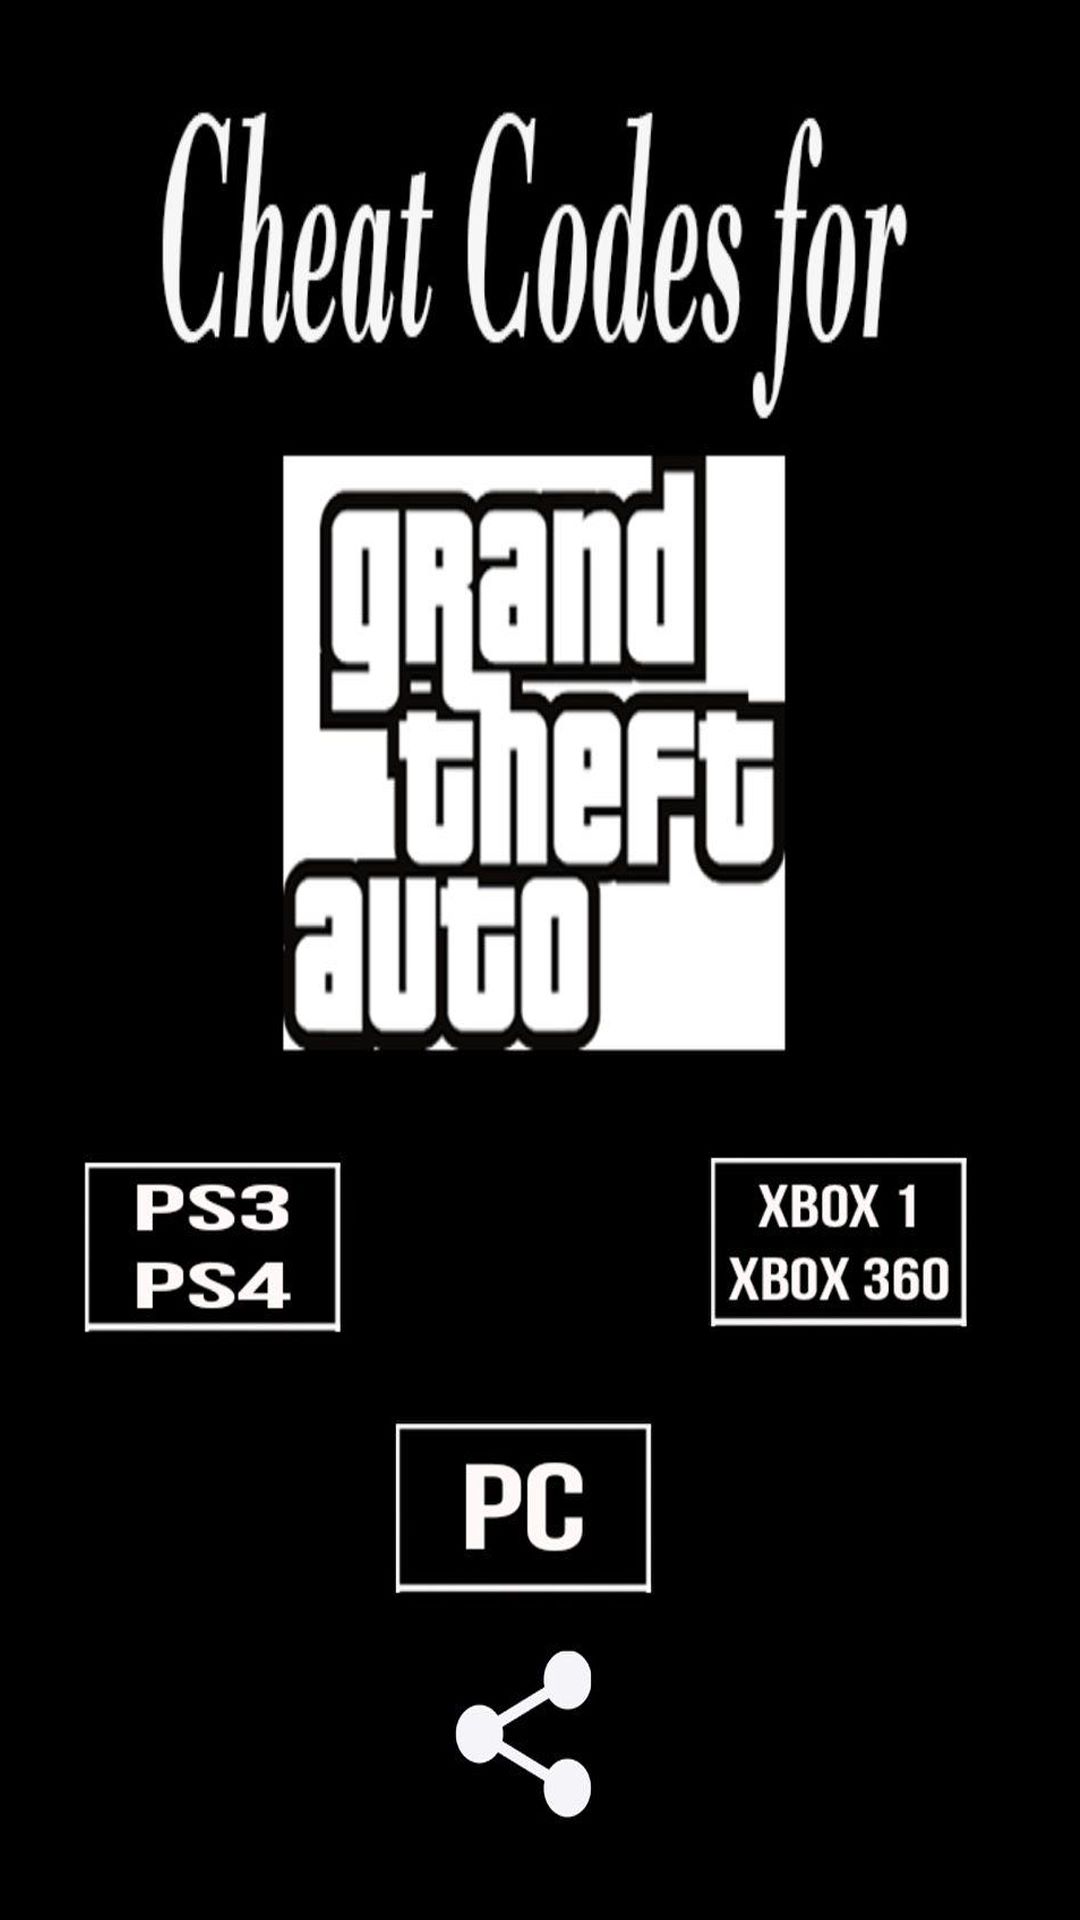 Cheats for GTA - for all Grand Theft Auto games – Microsoft апликације